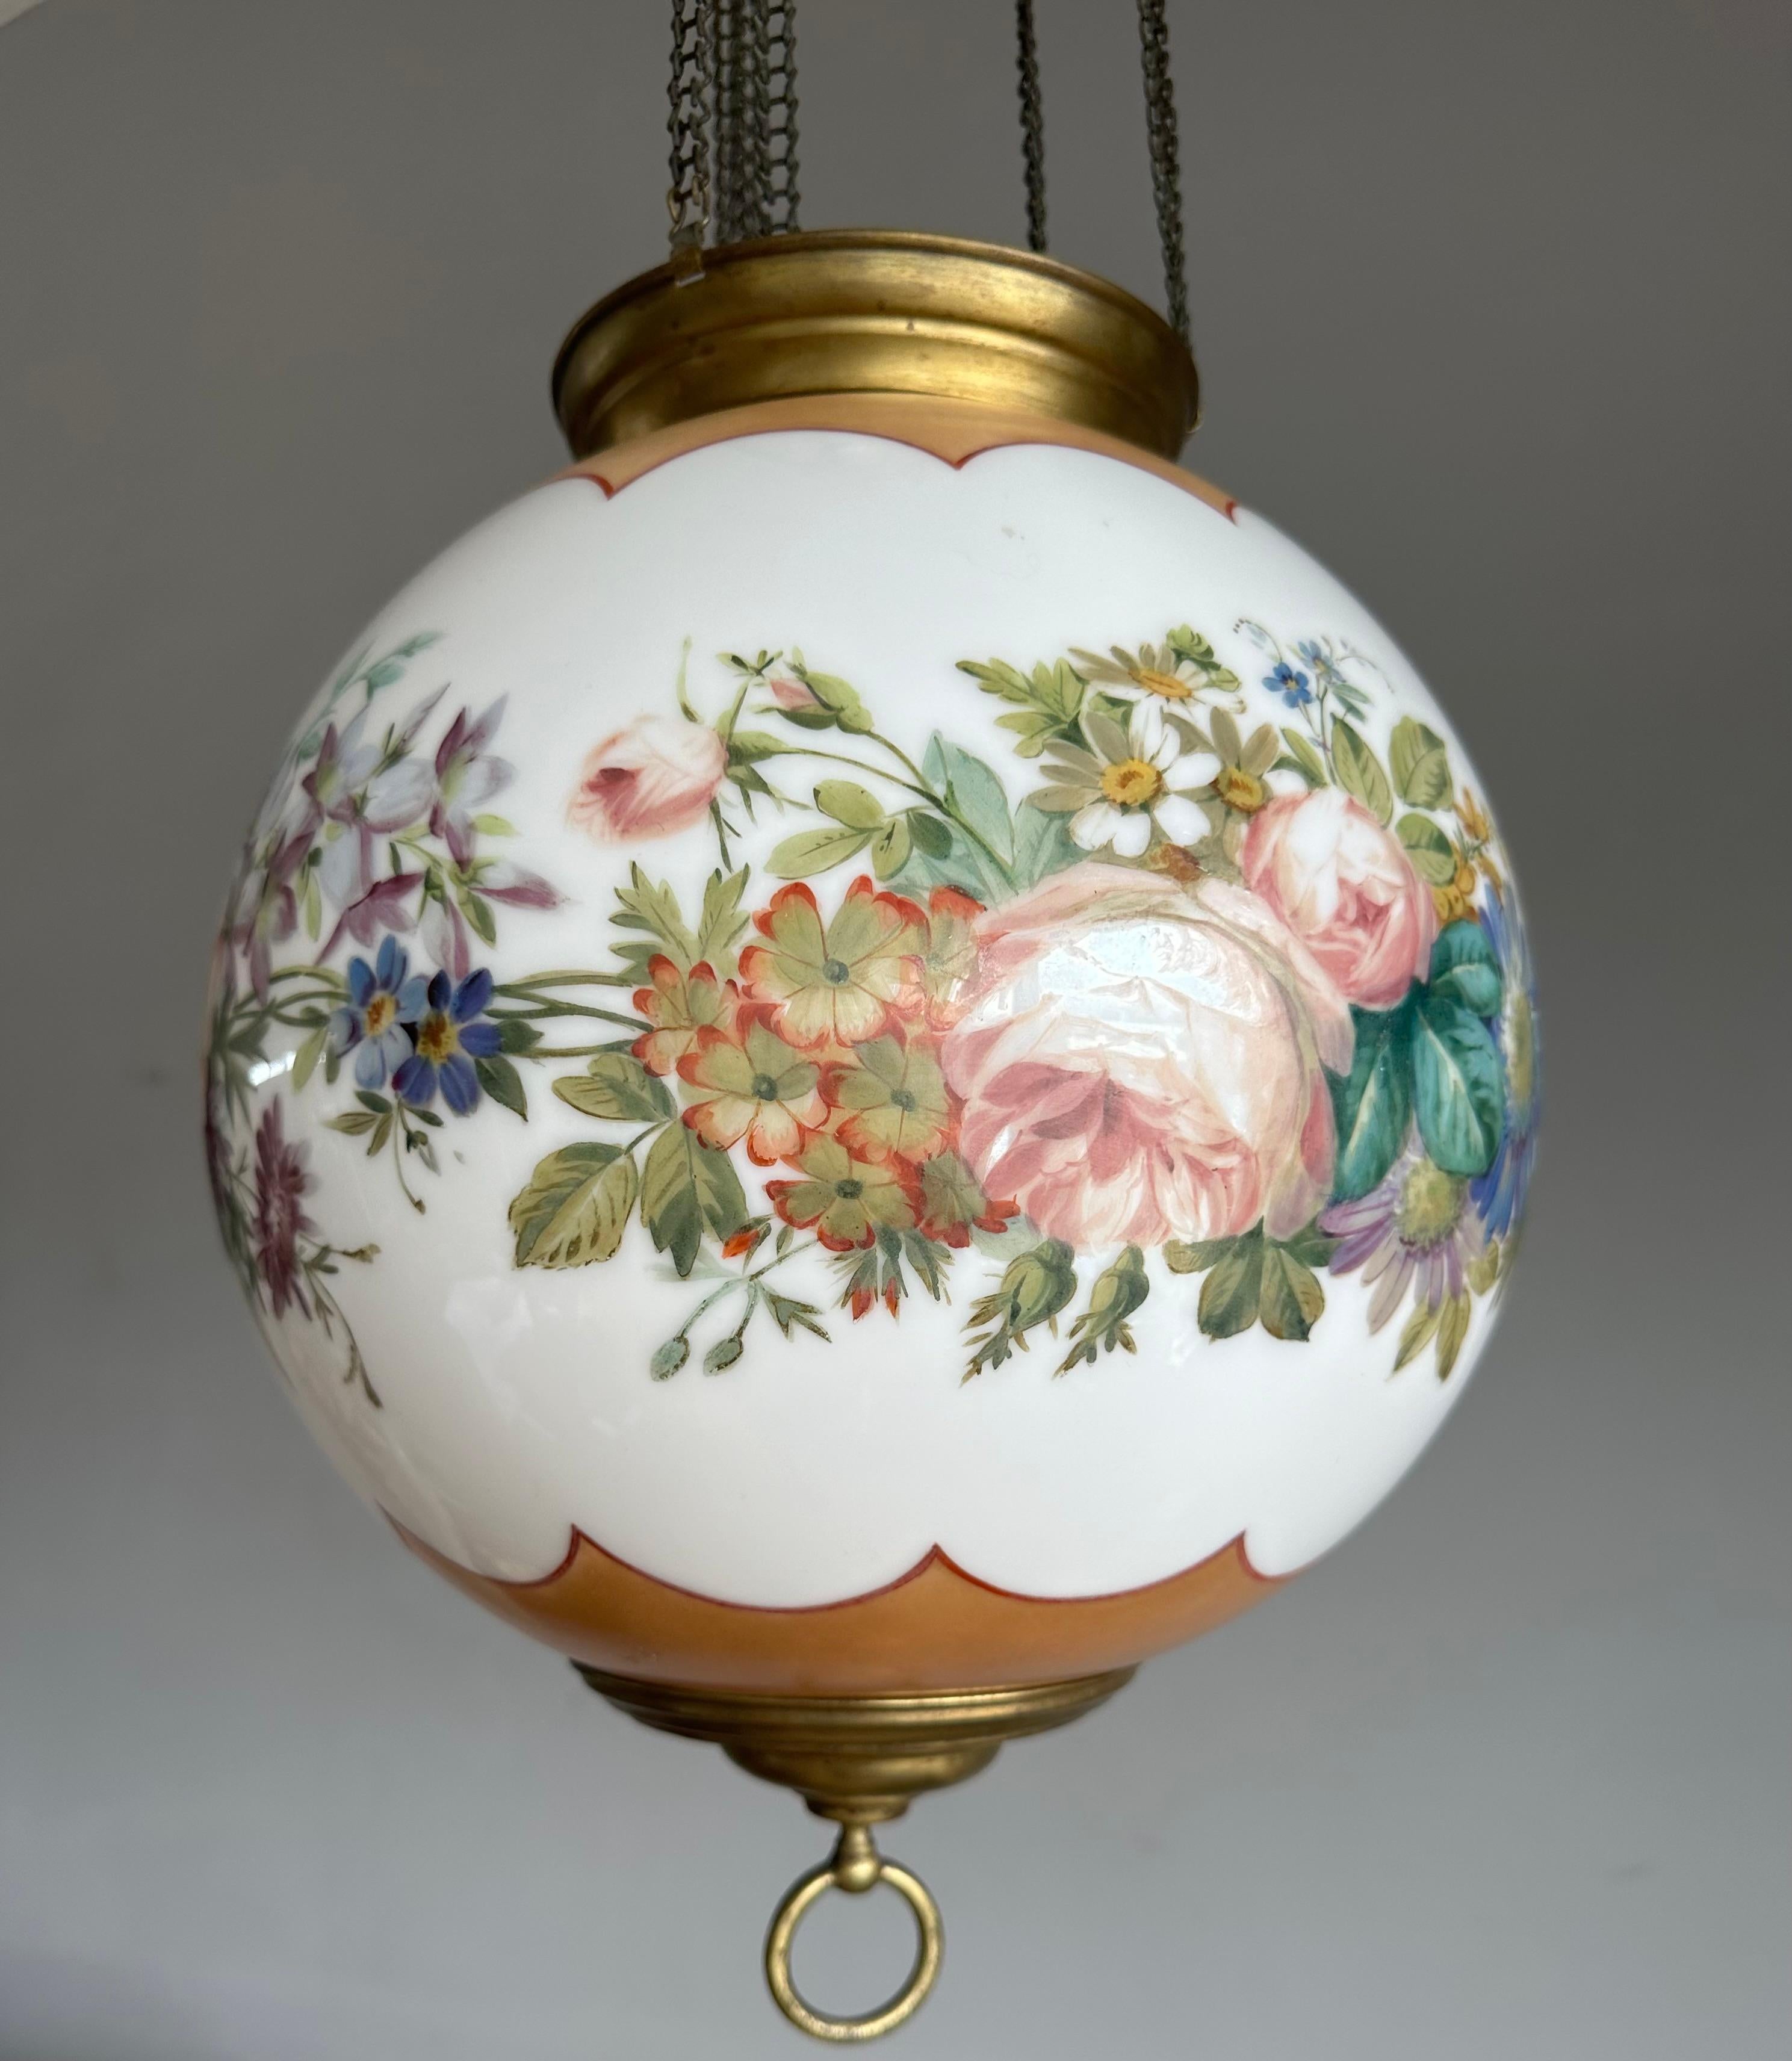 European Antique Round Opaline Glass Shade Pendant Light with Wreath of Flowers Decor For Sale